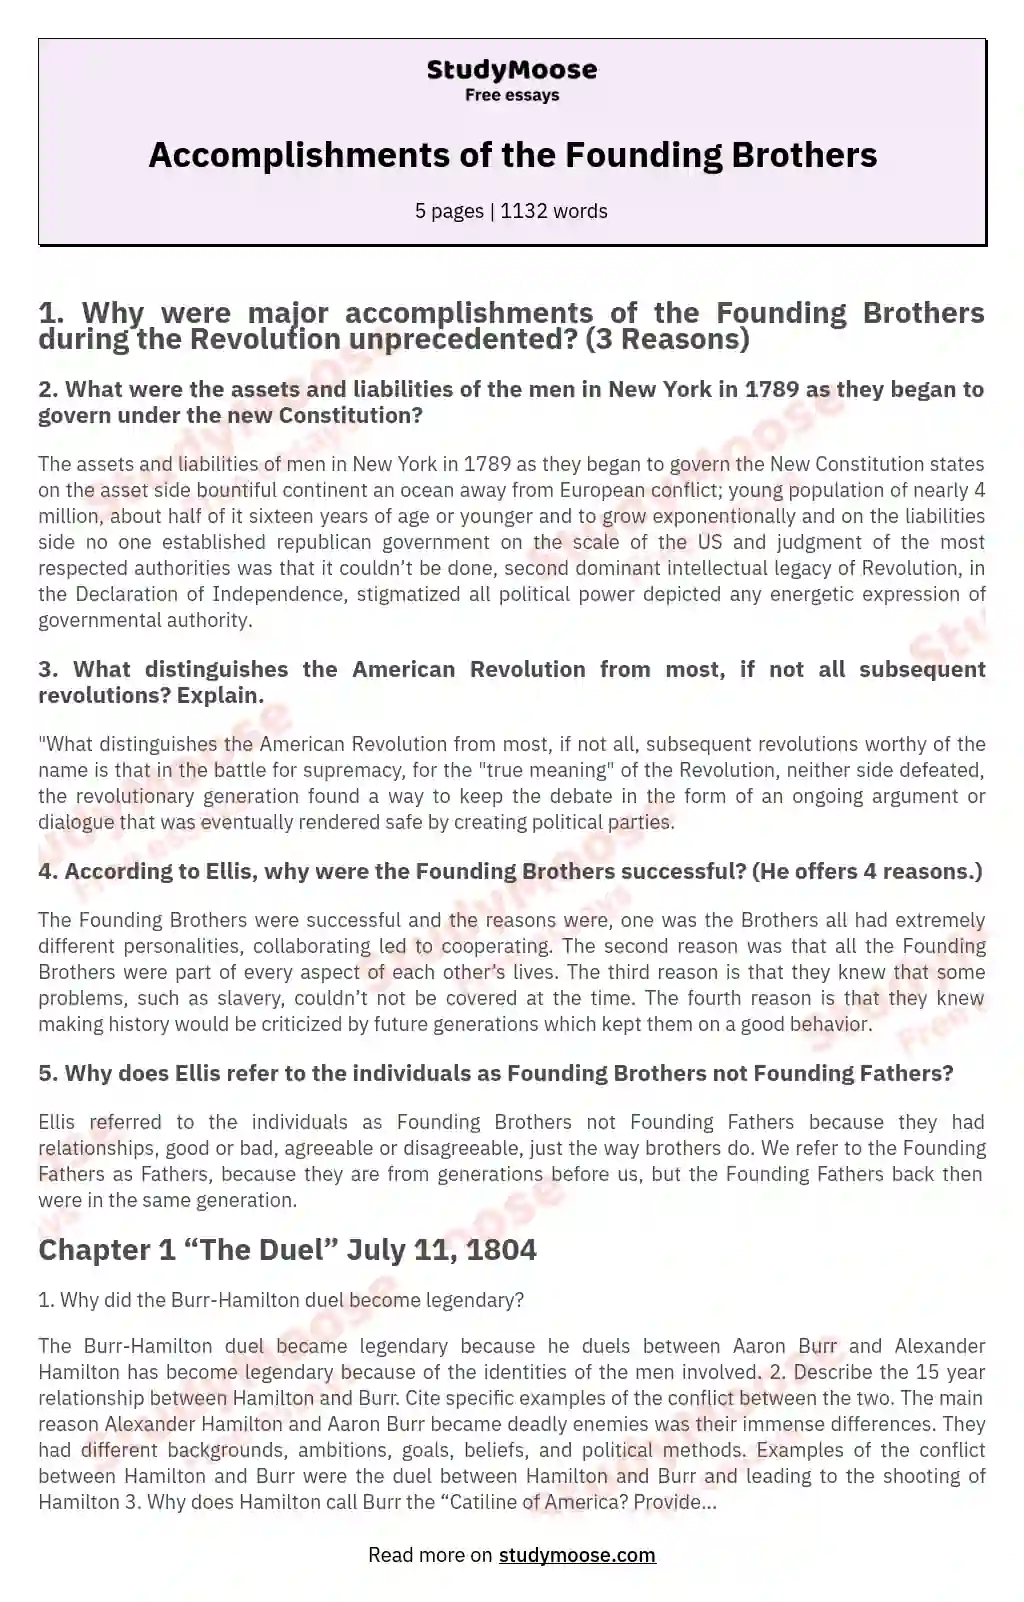 Accomplishments of the Founding Brothers essay